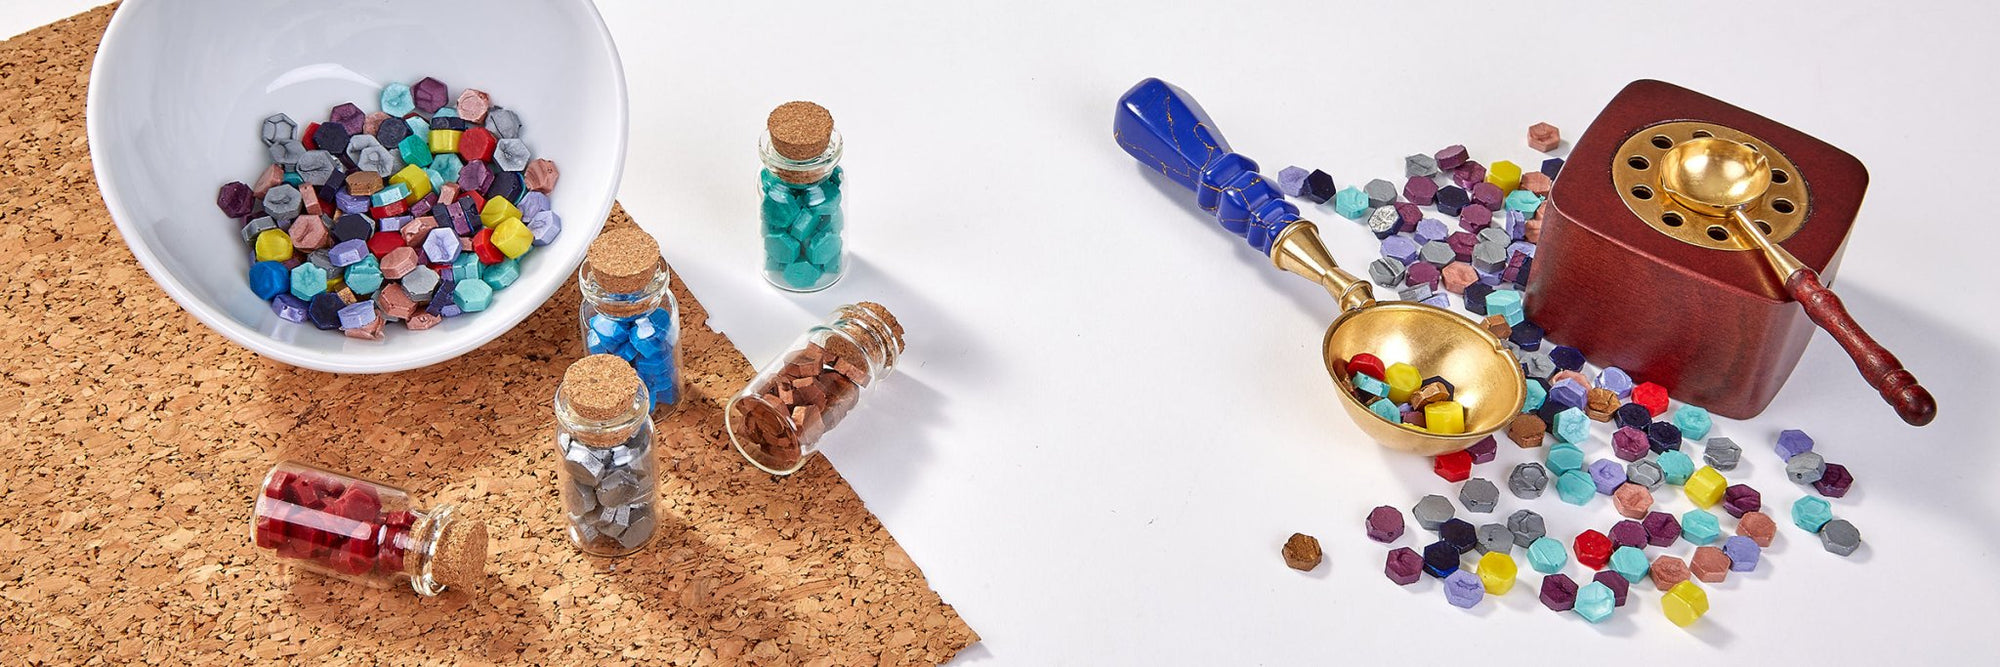 Wine Bottle Sealing Wax Pastilles by The Pound